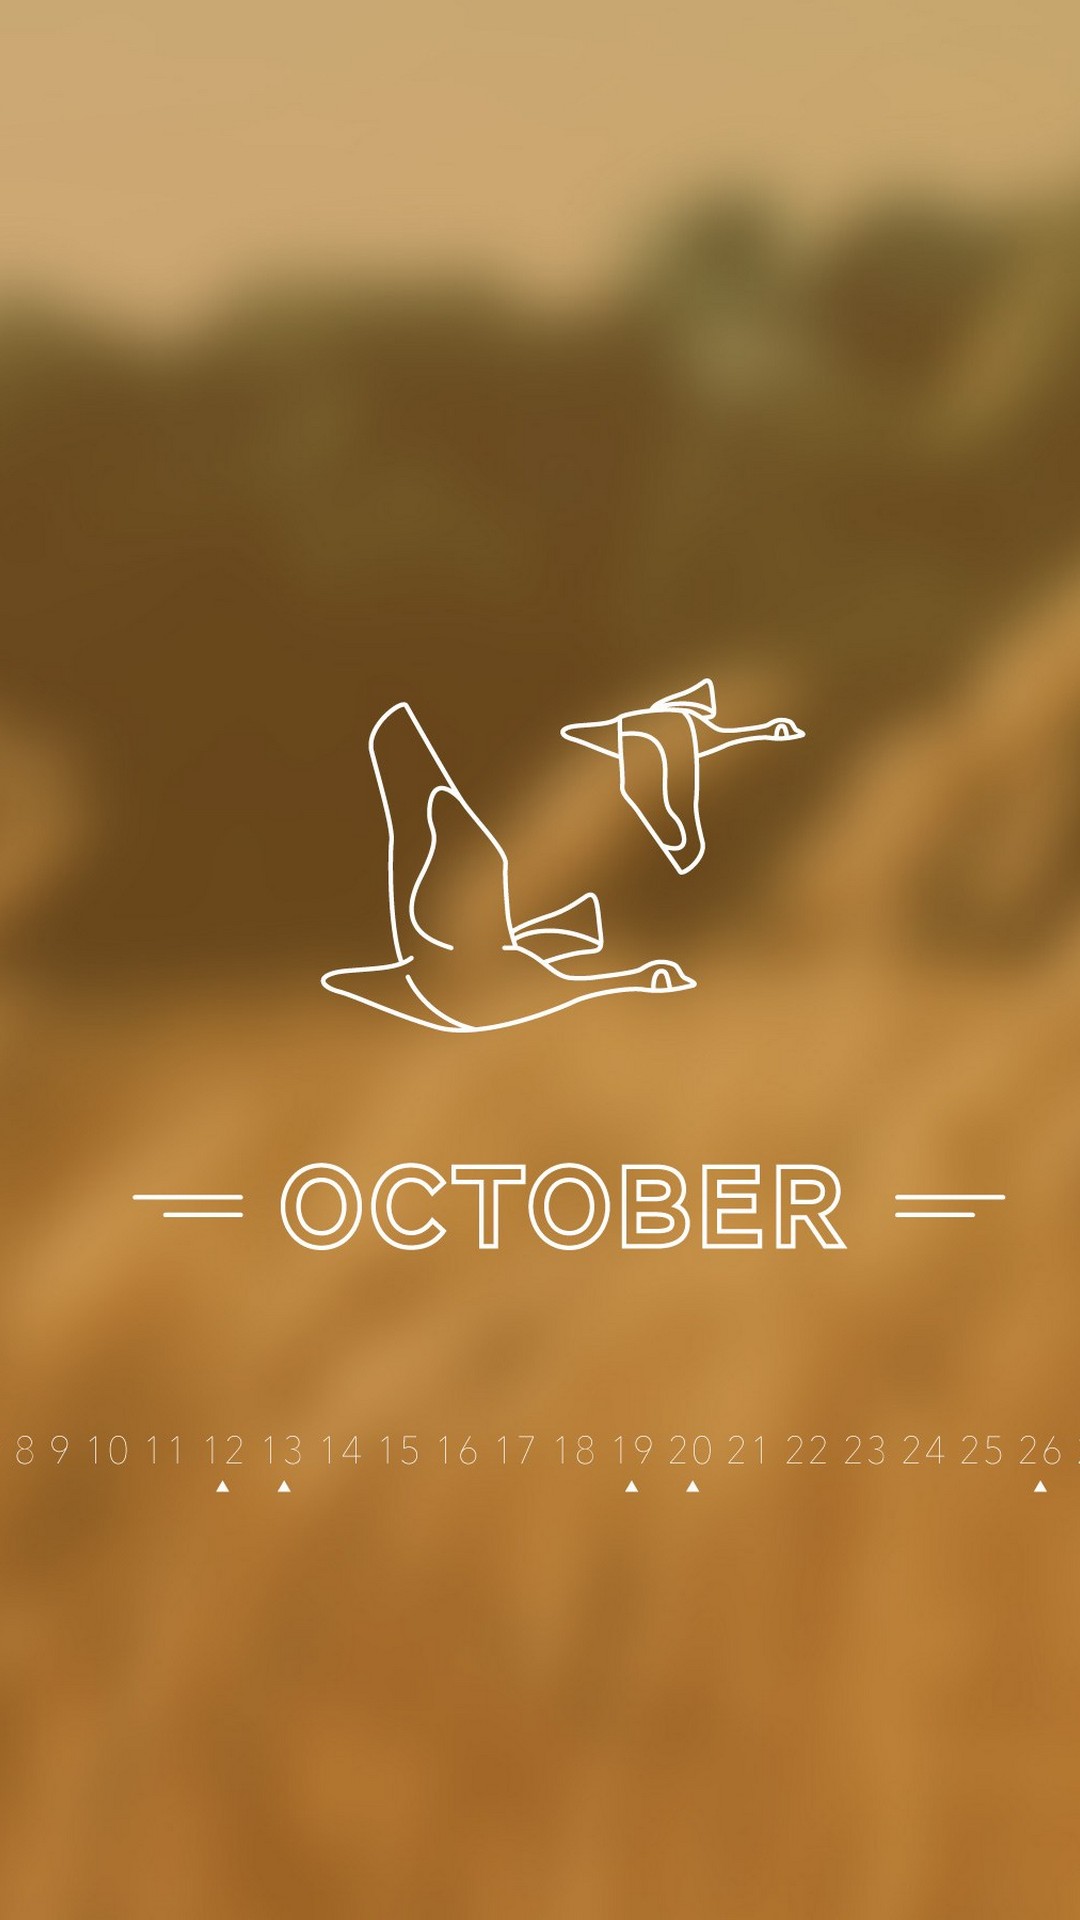 October i Phones Wallpaper with high-resolution 1080x1920 pixel. Download all Mobile Wallpapers and Use them as wallpapers for your iPhone, Tablet, iPad, Android and other mobile devices